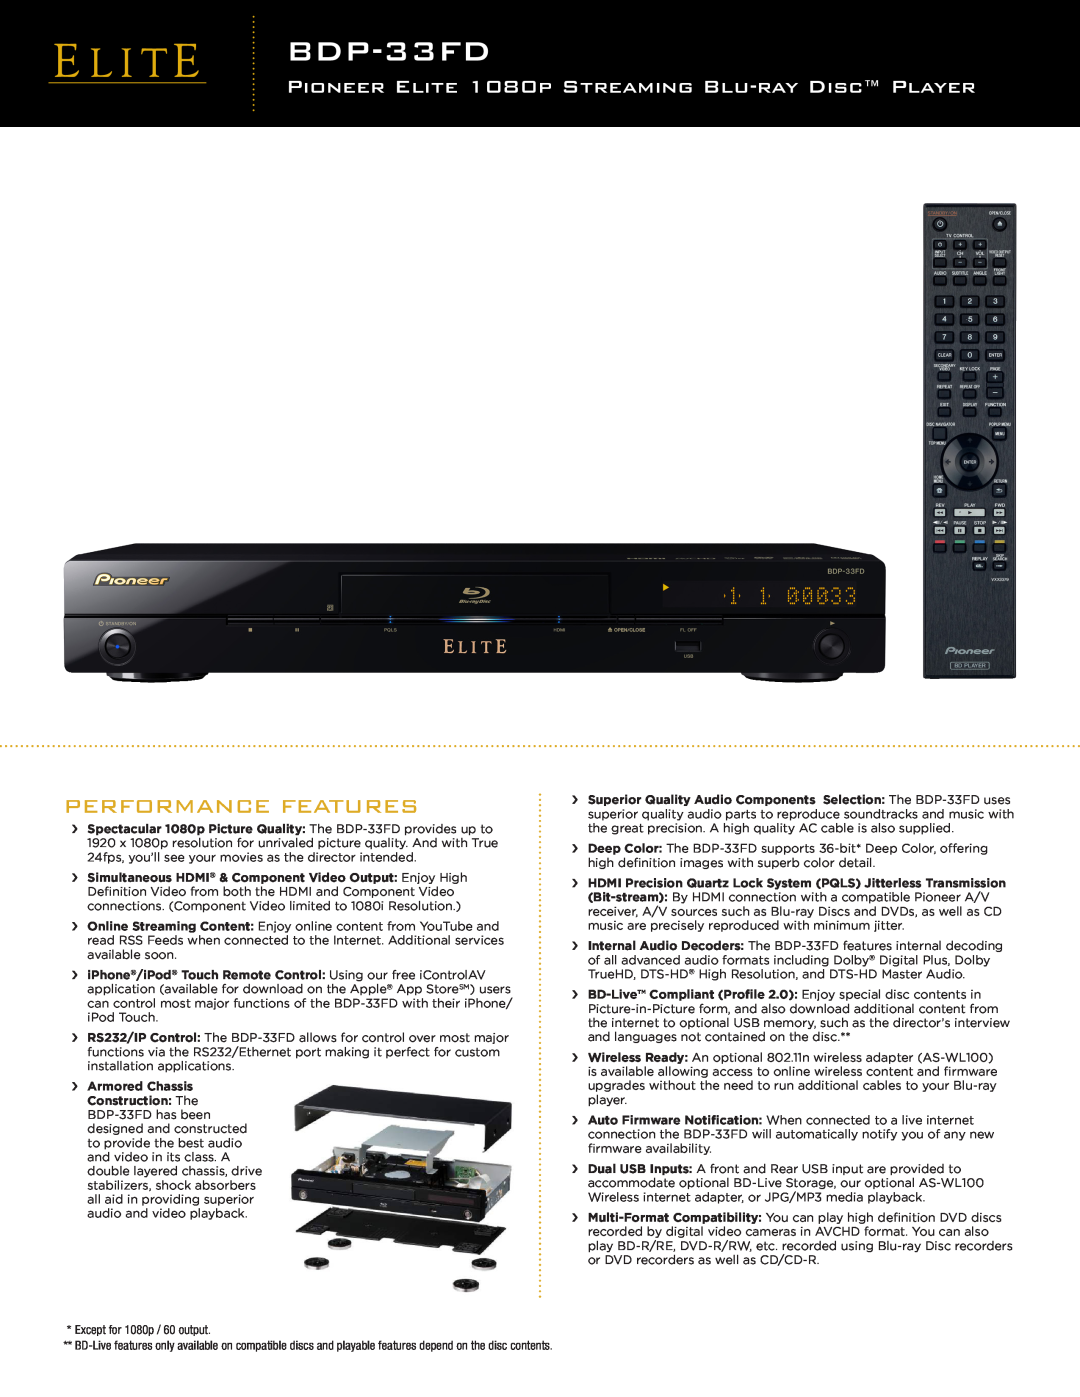 Pioneer BDP-33FD manual Performance Features, PIONEER ELITE 1080P STREAMING BLU-RAY DISC PLAYER 